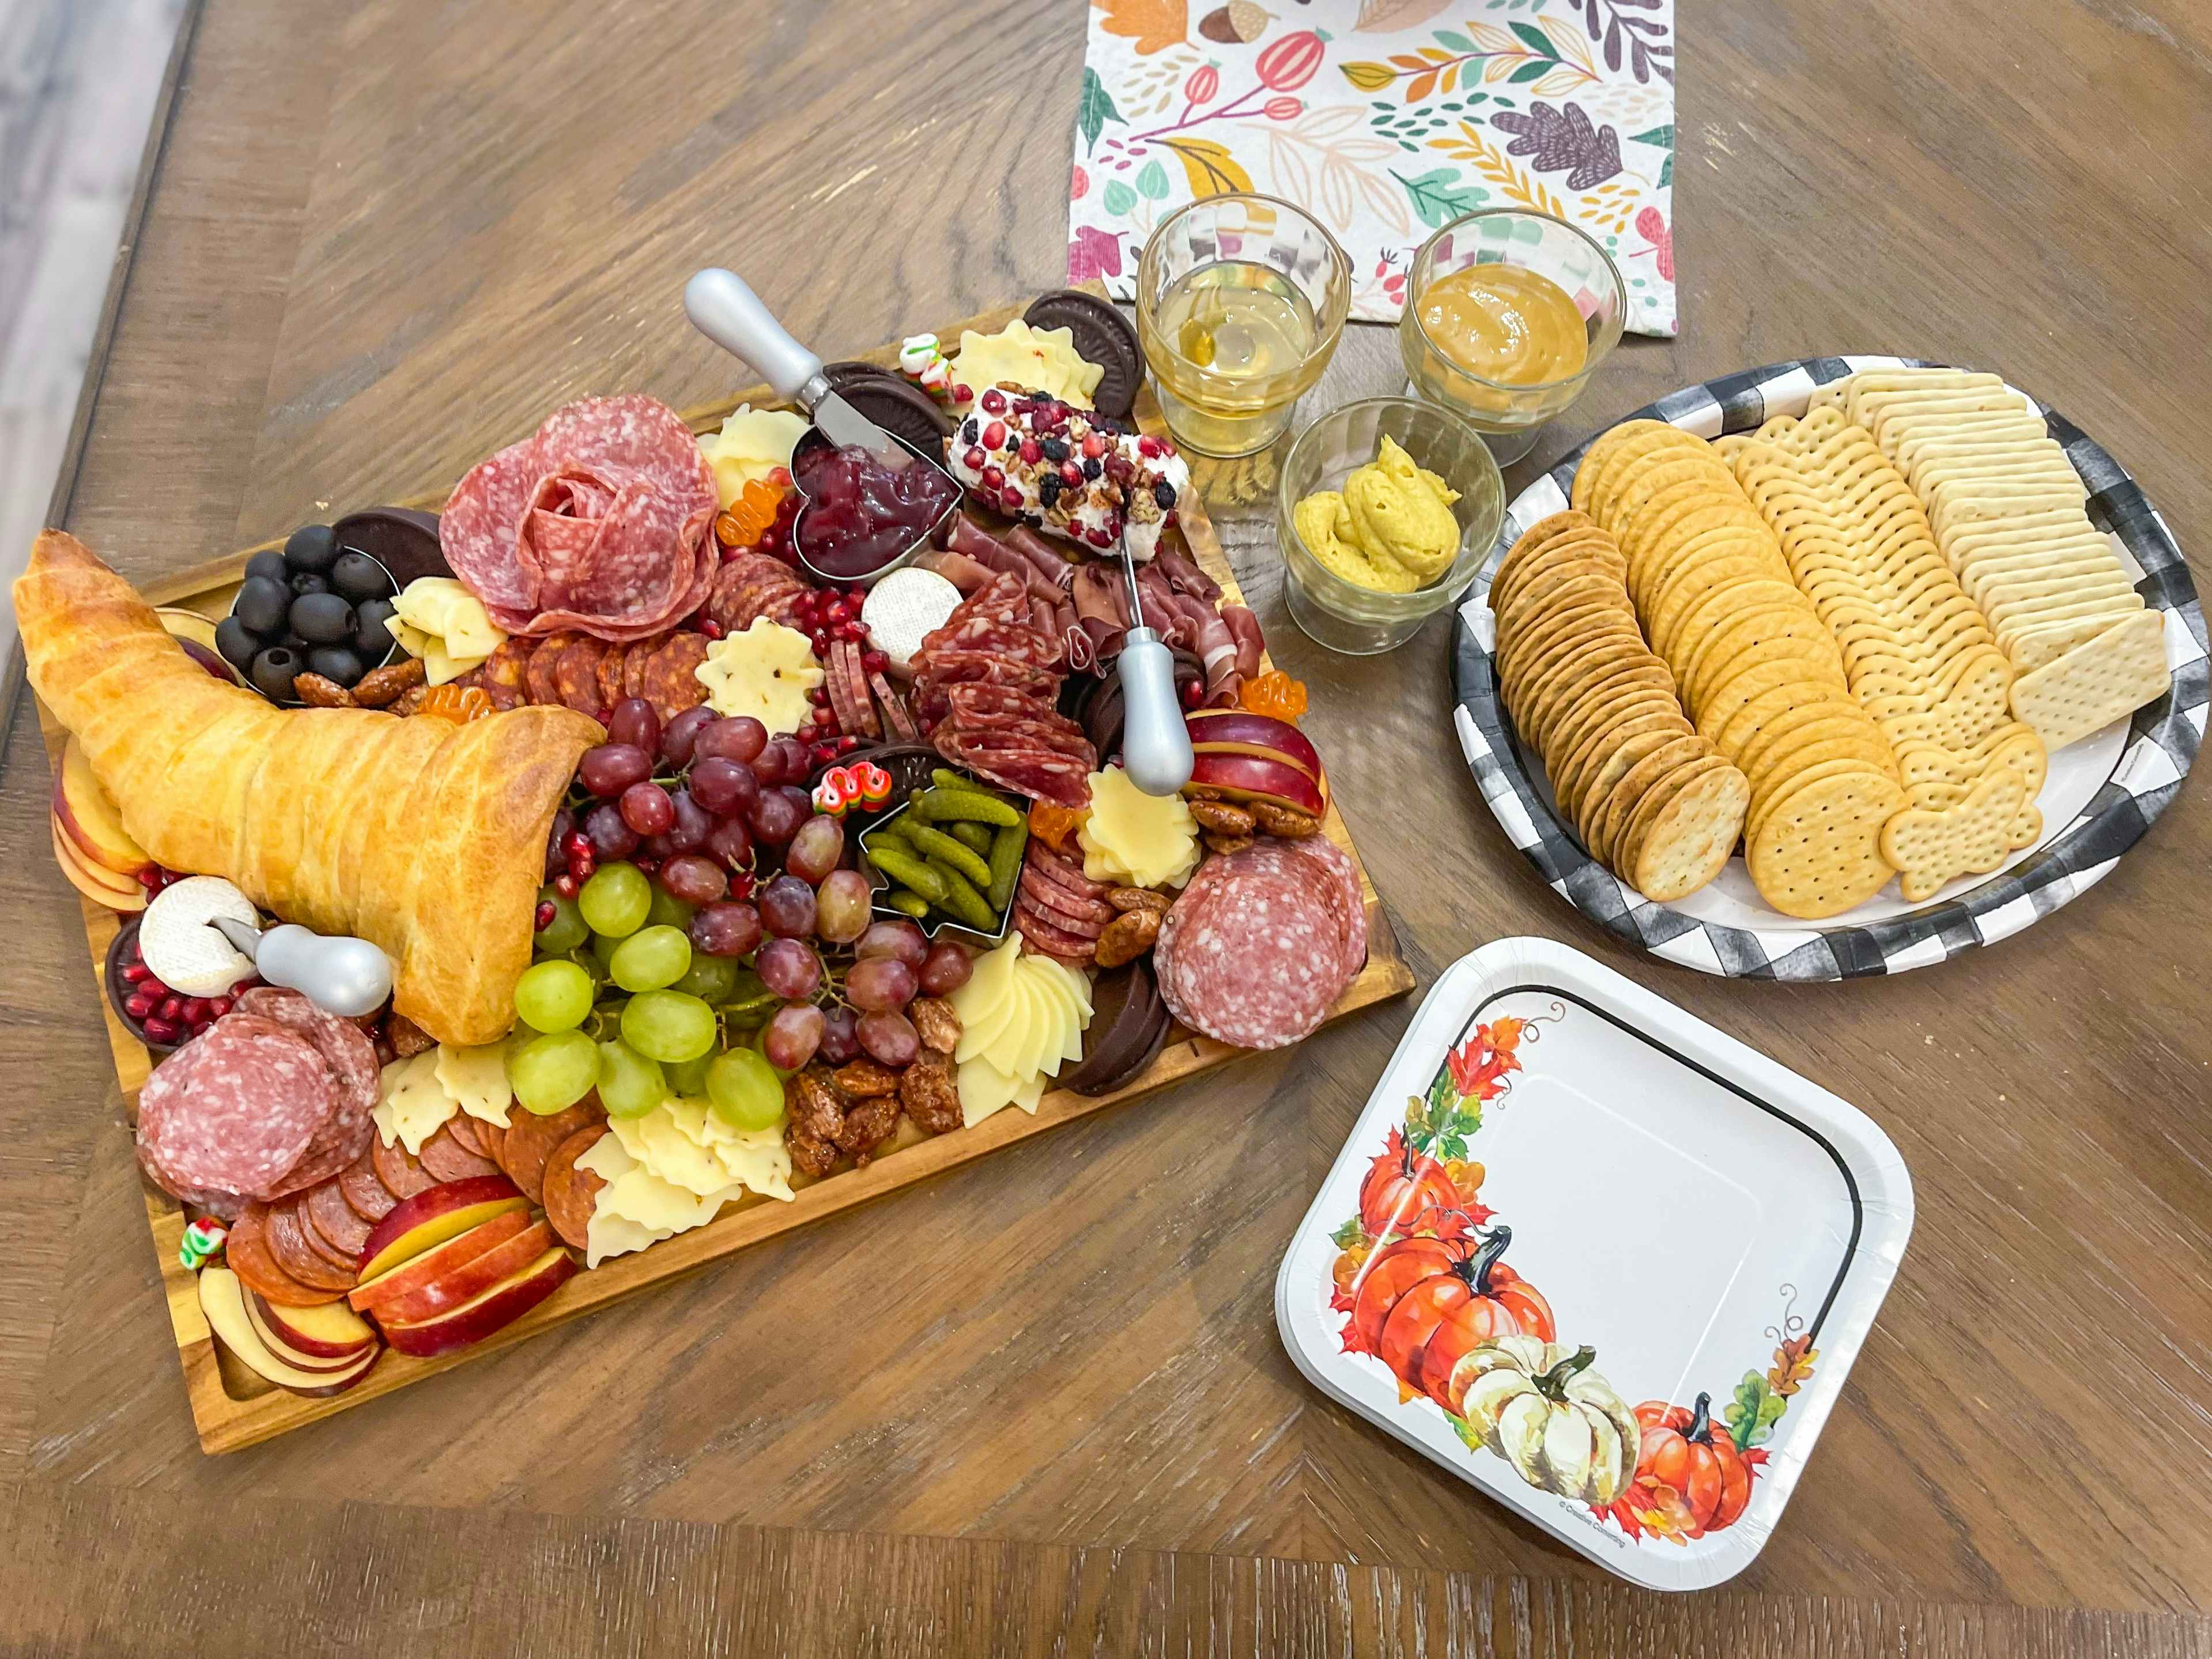 A Thanksgiving charcuterie board with meats, cheeses, and fruits coming out of a croissant cornucopia